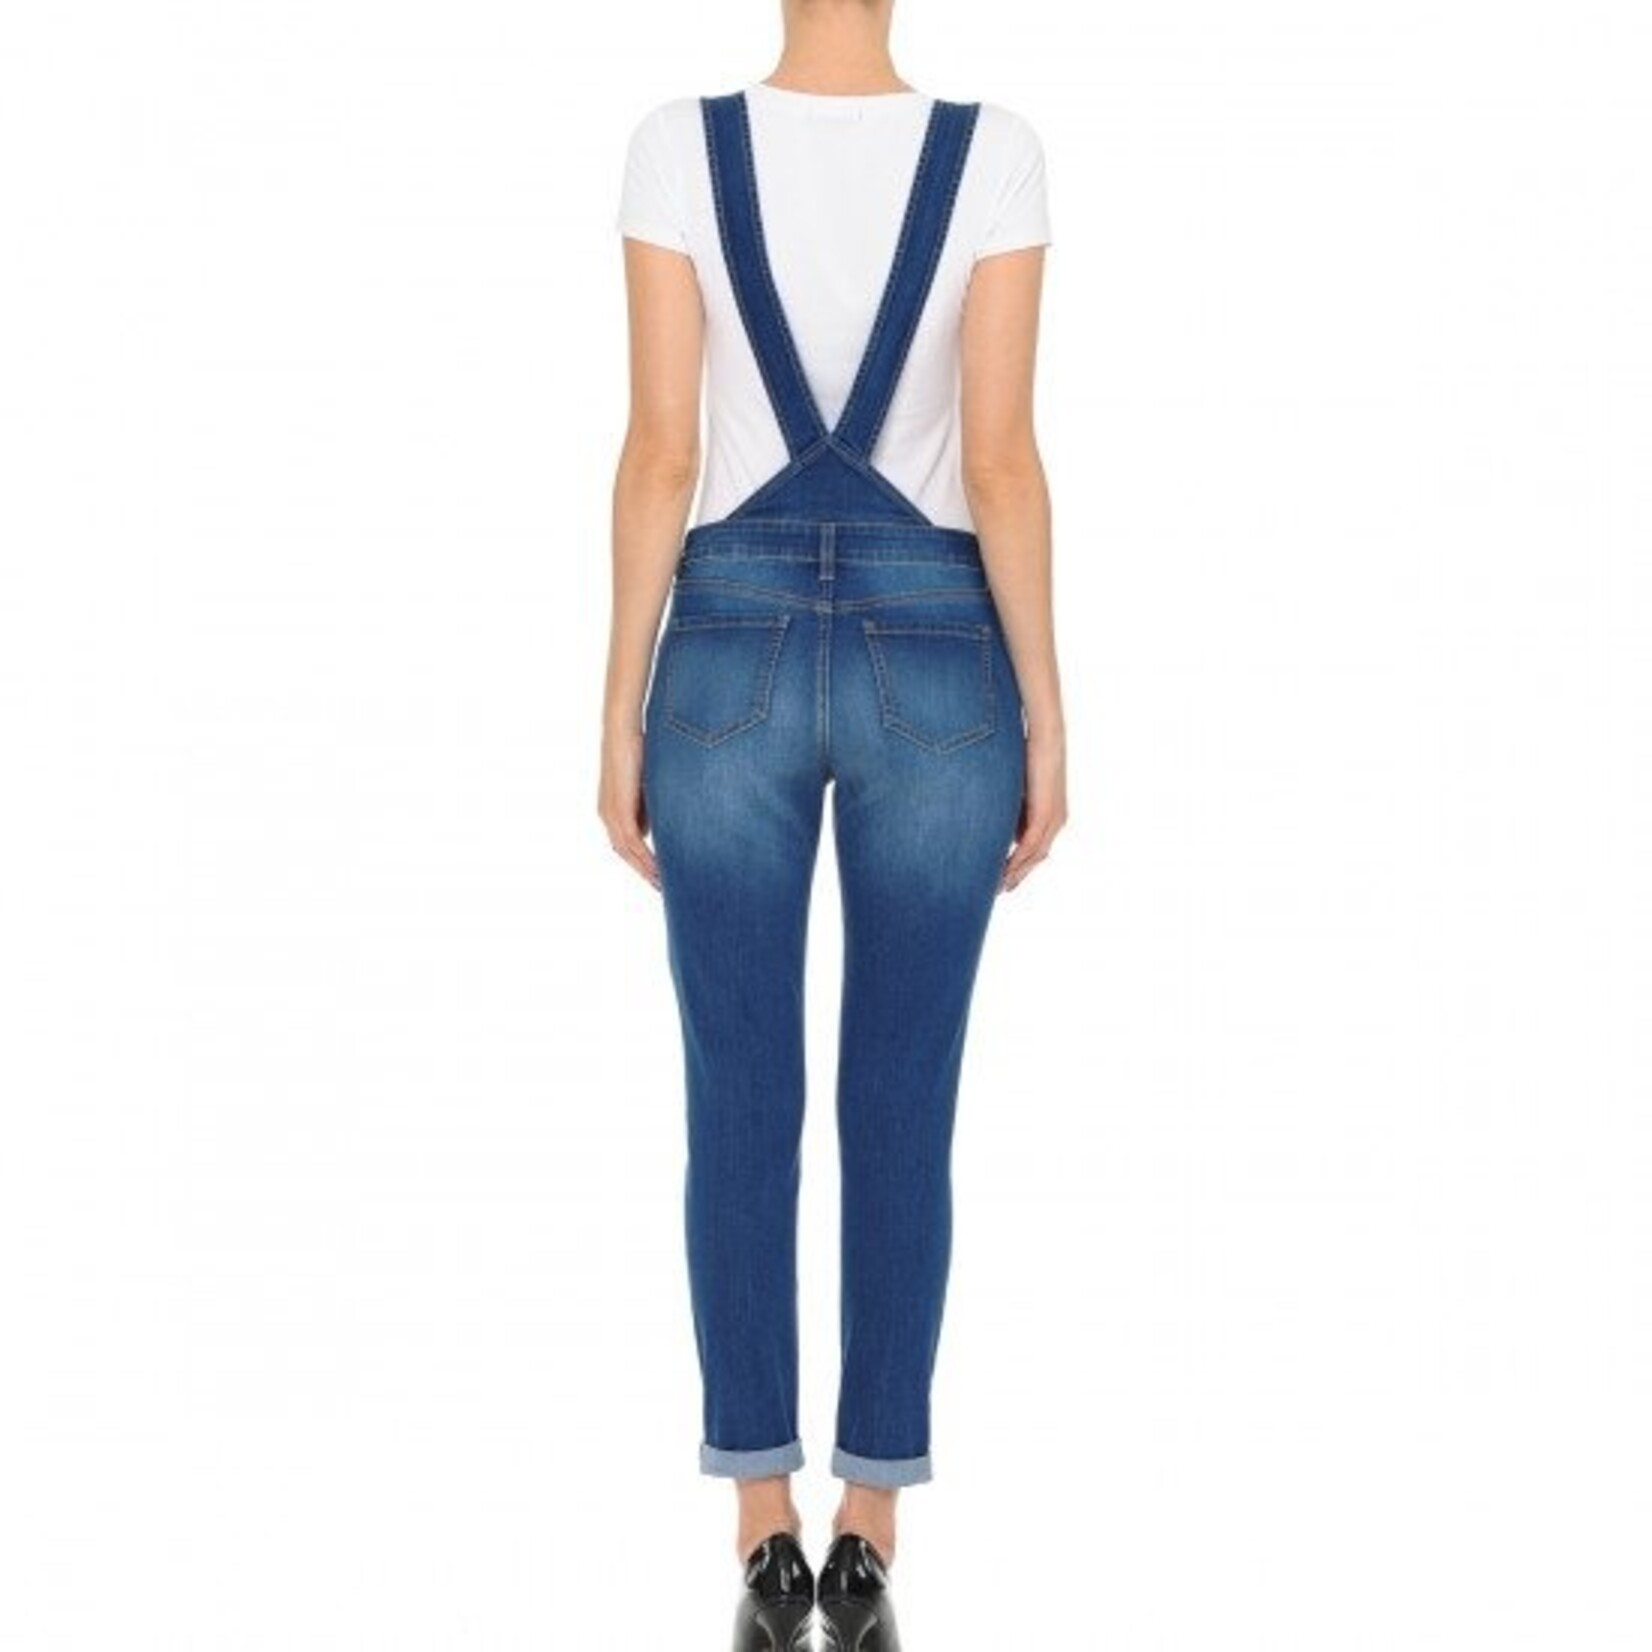 Wax Jeans WAX JEANS Women Overall Pants 90166